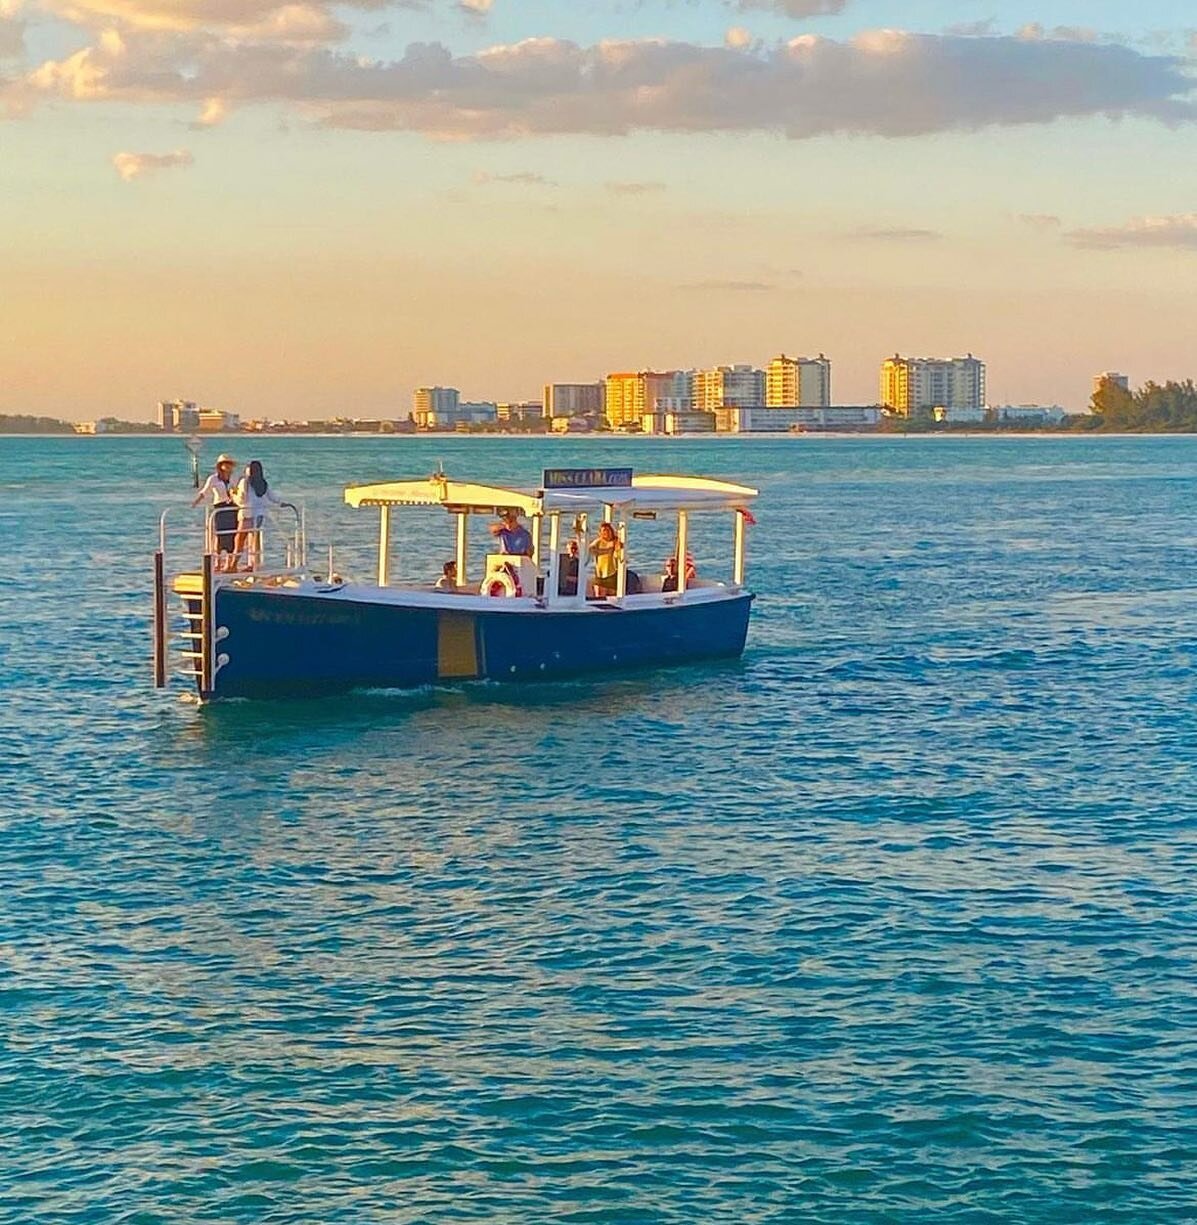 We&rsquo;re going out for a sunset cruise on Thanksgiving evening at 5pm. It&rsquo;s the perfect way to get some fresh air and enjoy the holidays in Florida while our friends up north are shoveling snow!